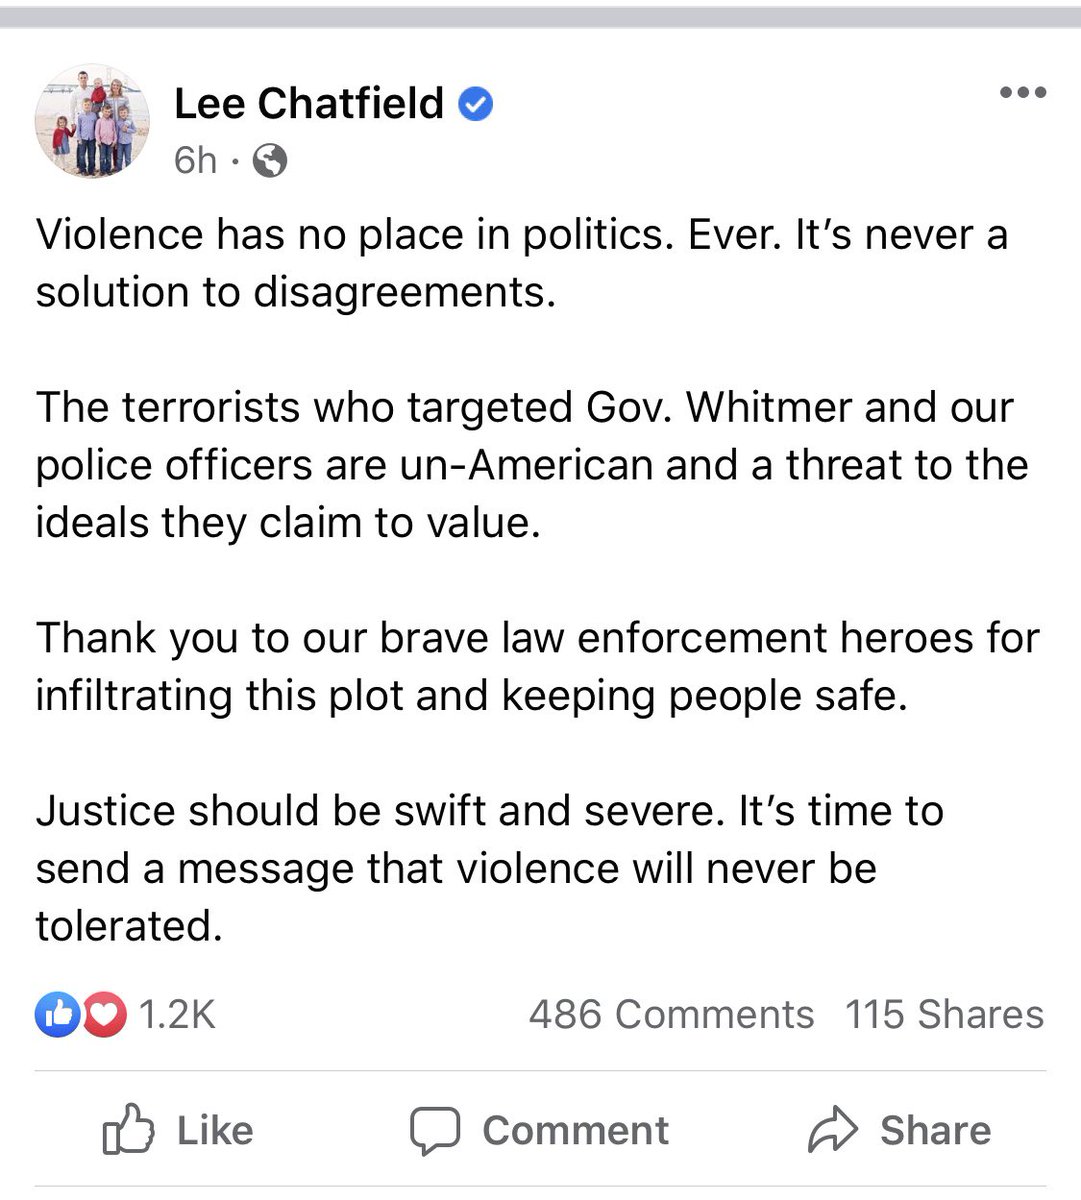 Michigan House Speaker  @LeeChatfield calls men who plotted to kidnap  @GovWhitmer and kill cops “terrorists” in statement on Facebook.